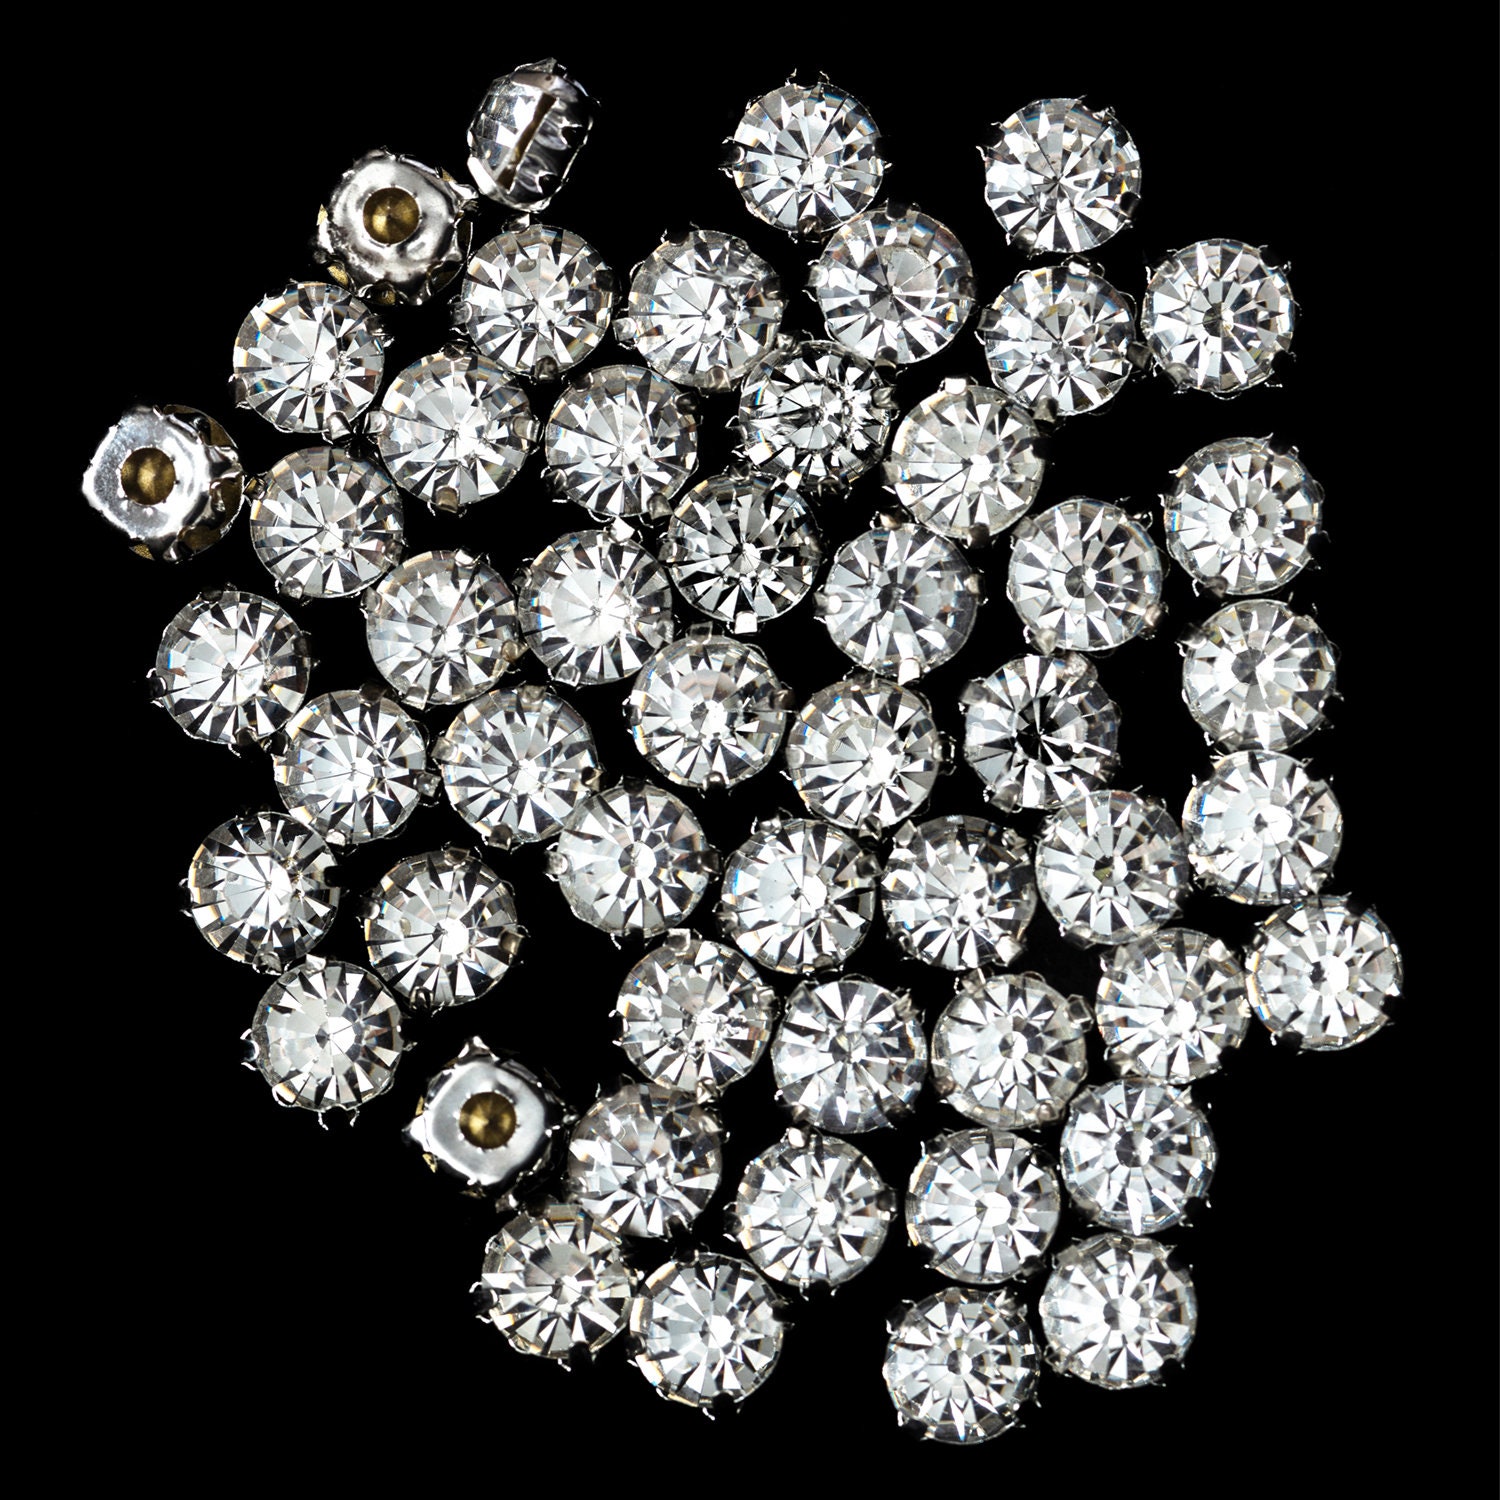 Wholesale PandaHall 70 Pcs 7 Styles Black Crystal Acrylic Sew on Rhinestone  Flatback Sewing Stones for Clothes Dress Crafts Garments Accessories 